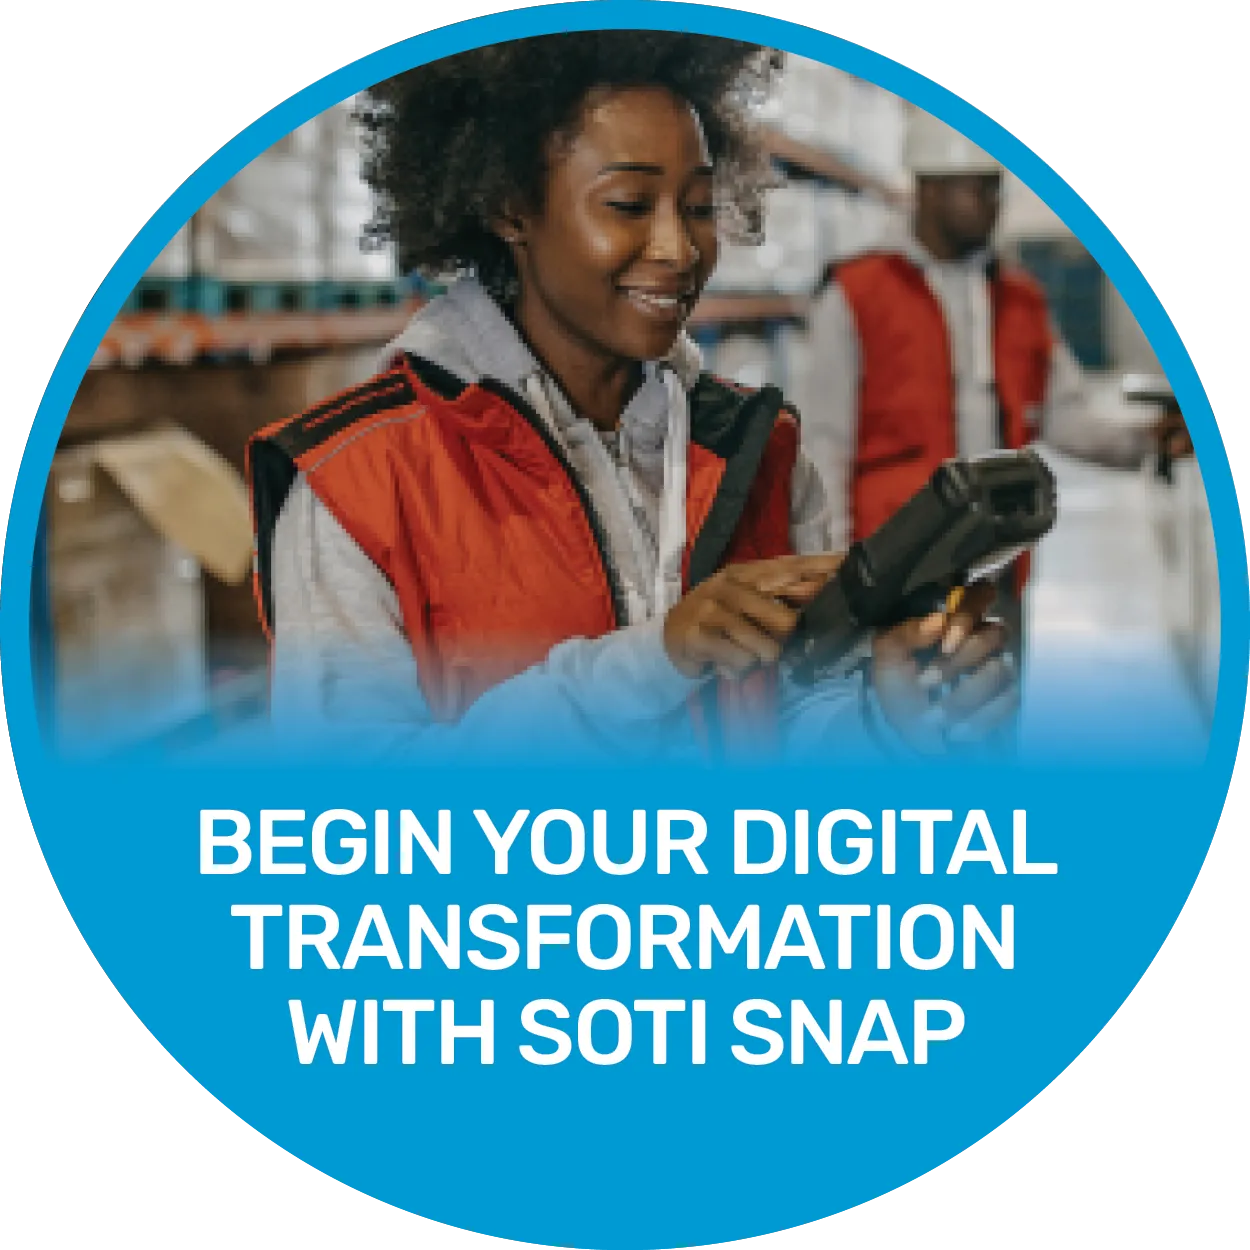 Begin your digital transformation with SOTI Snap